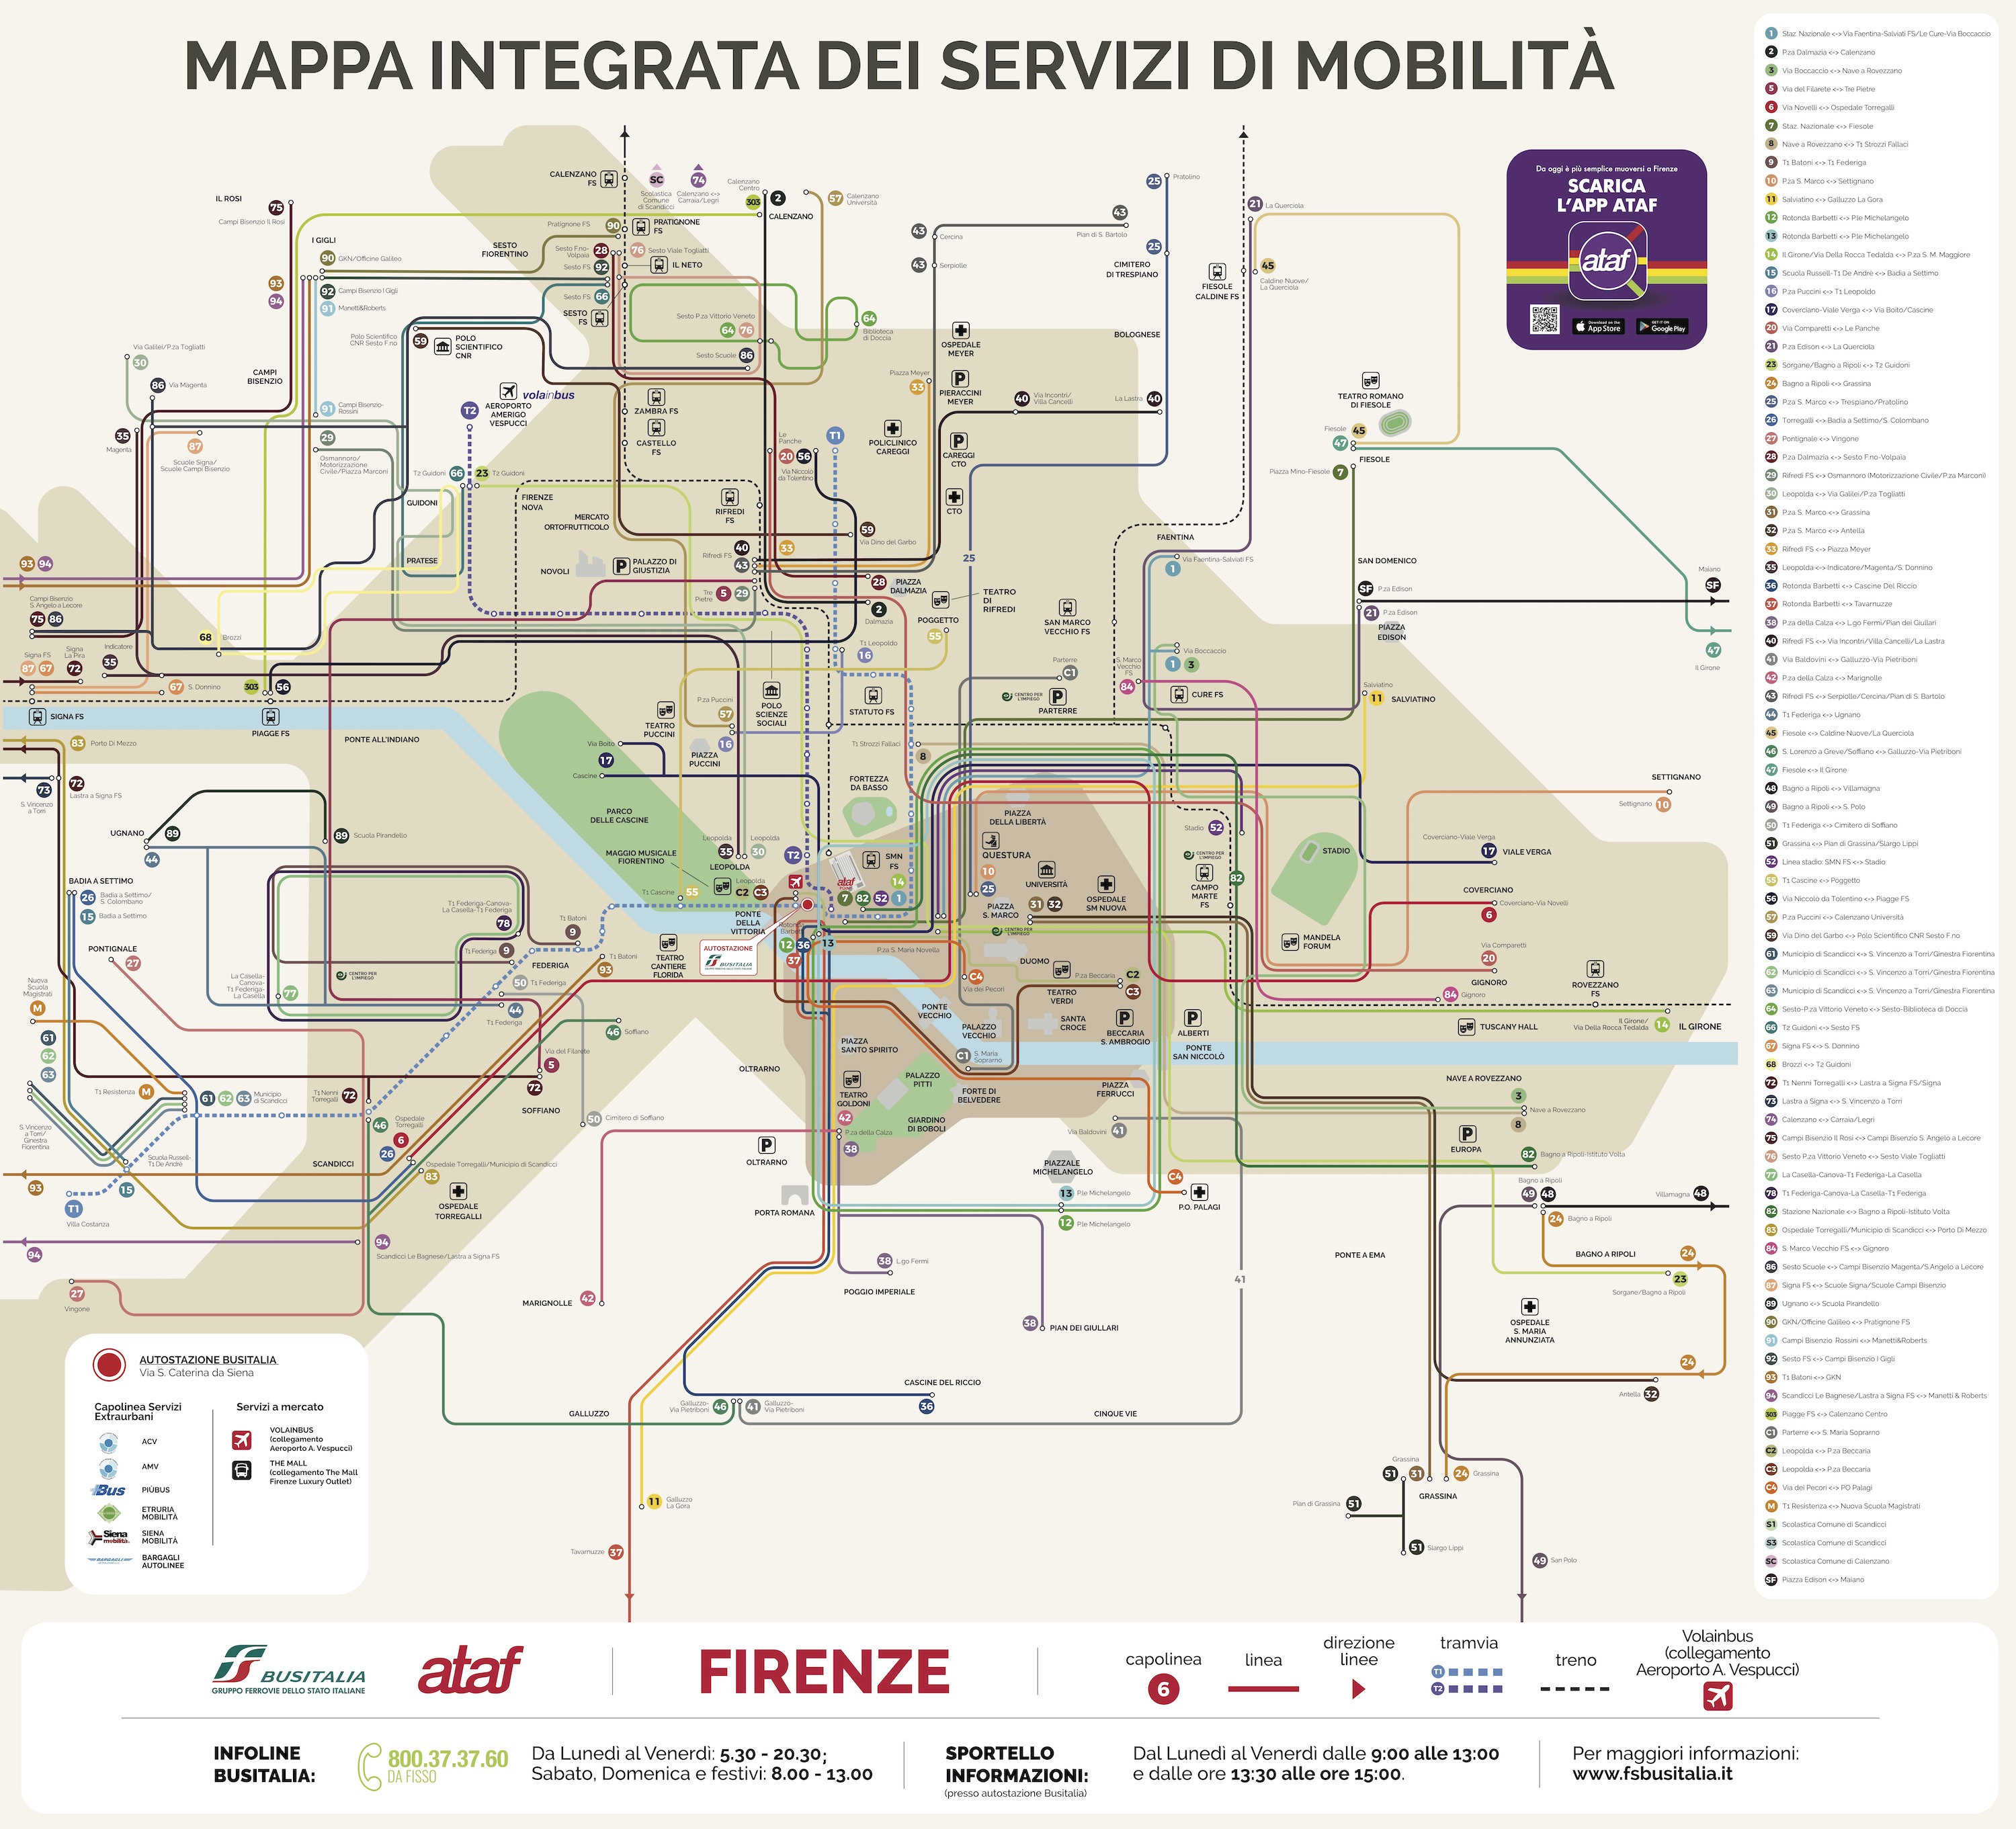 florence-italy-bus-routes.jpg